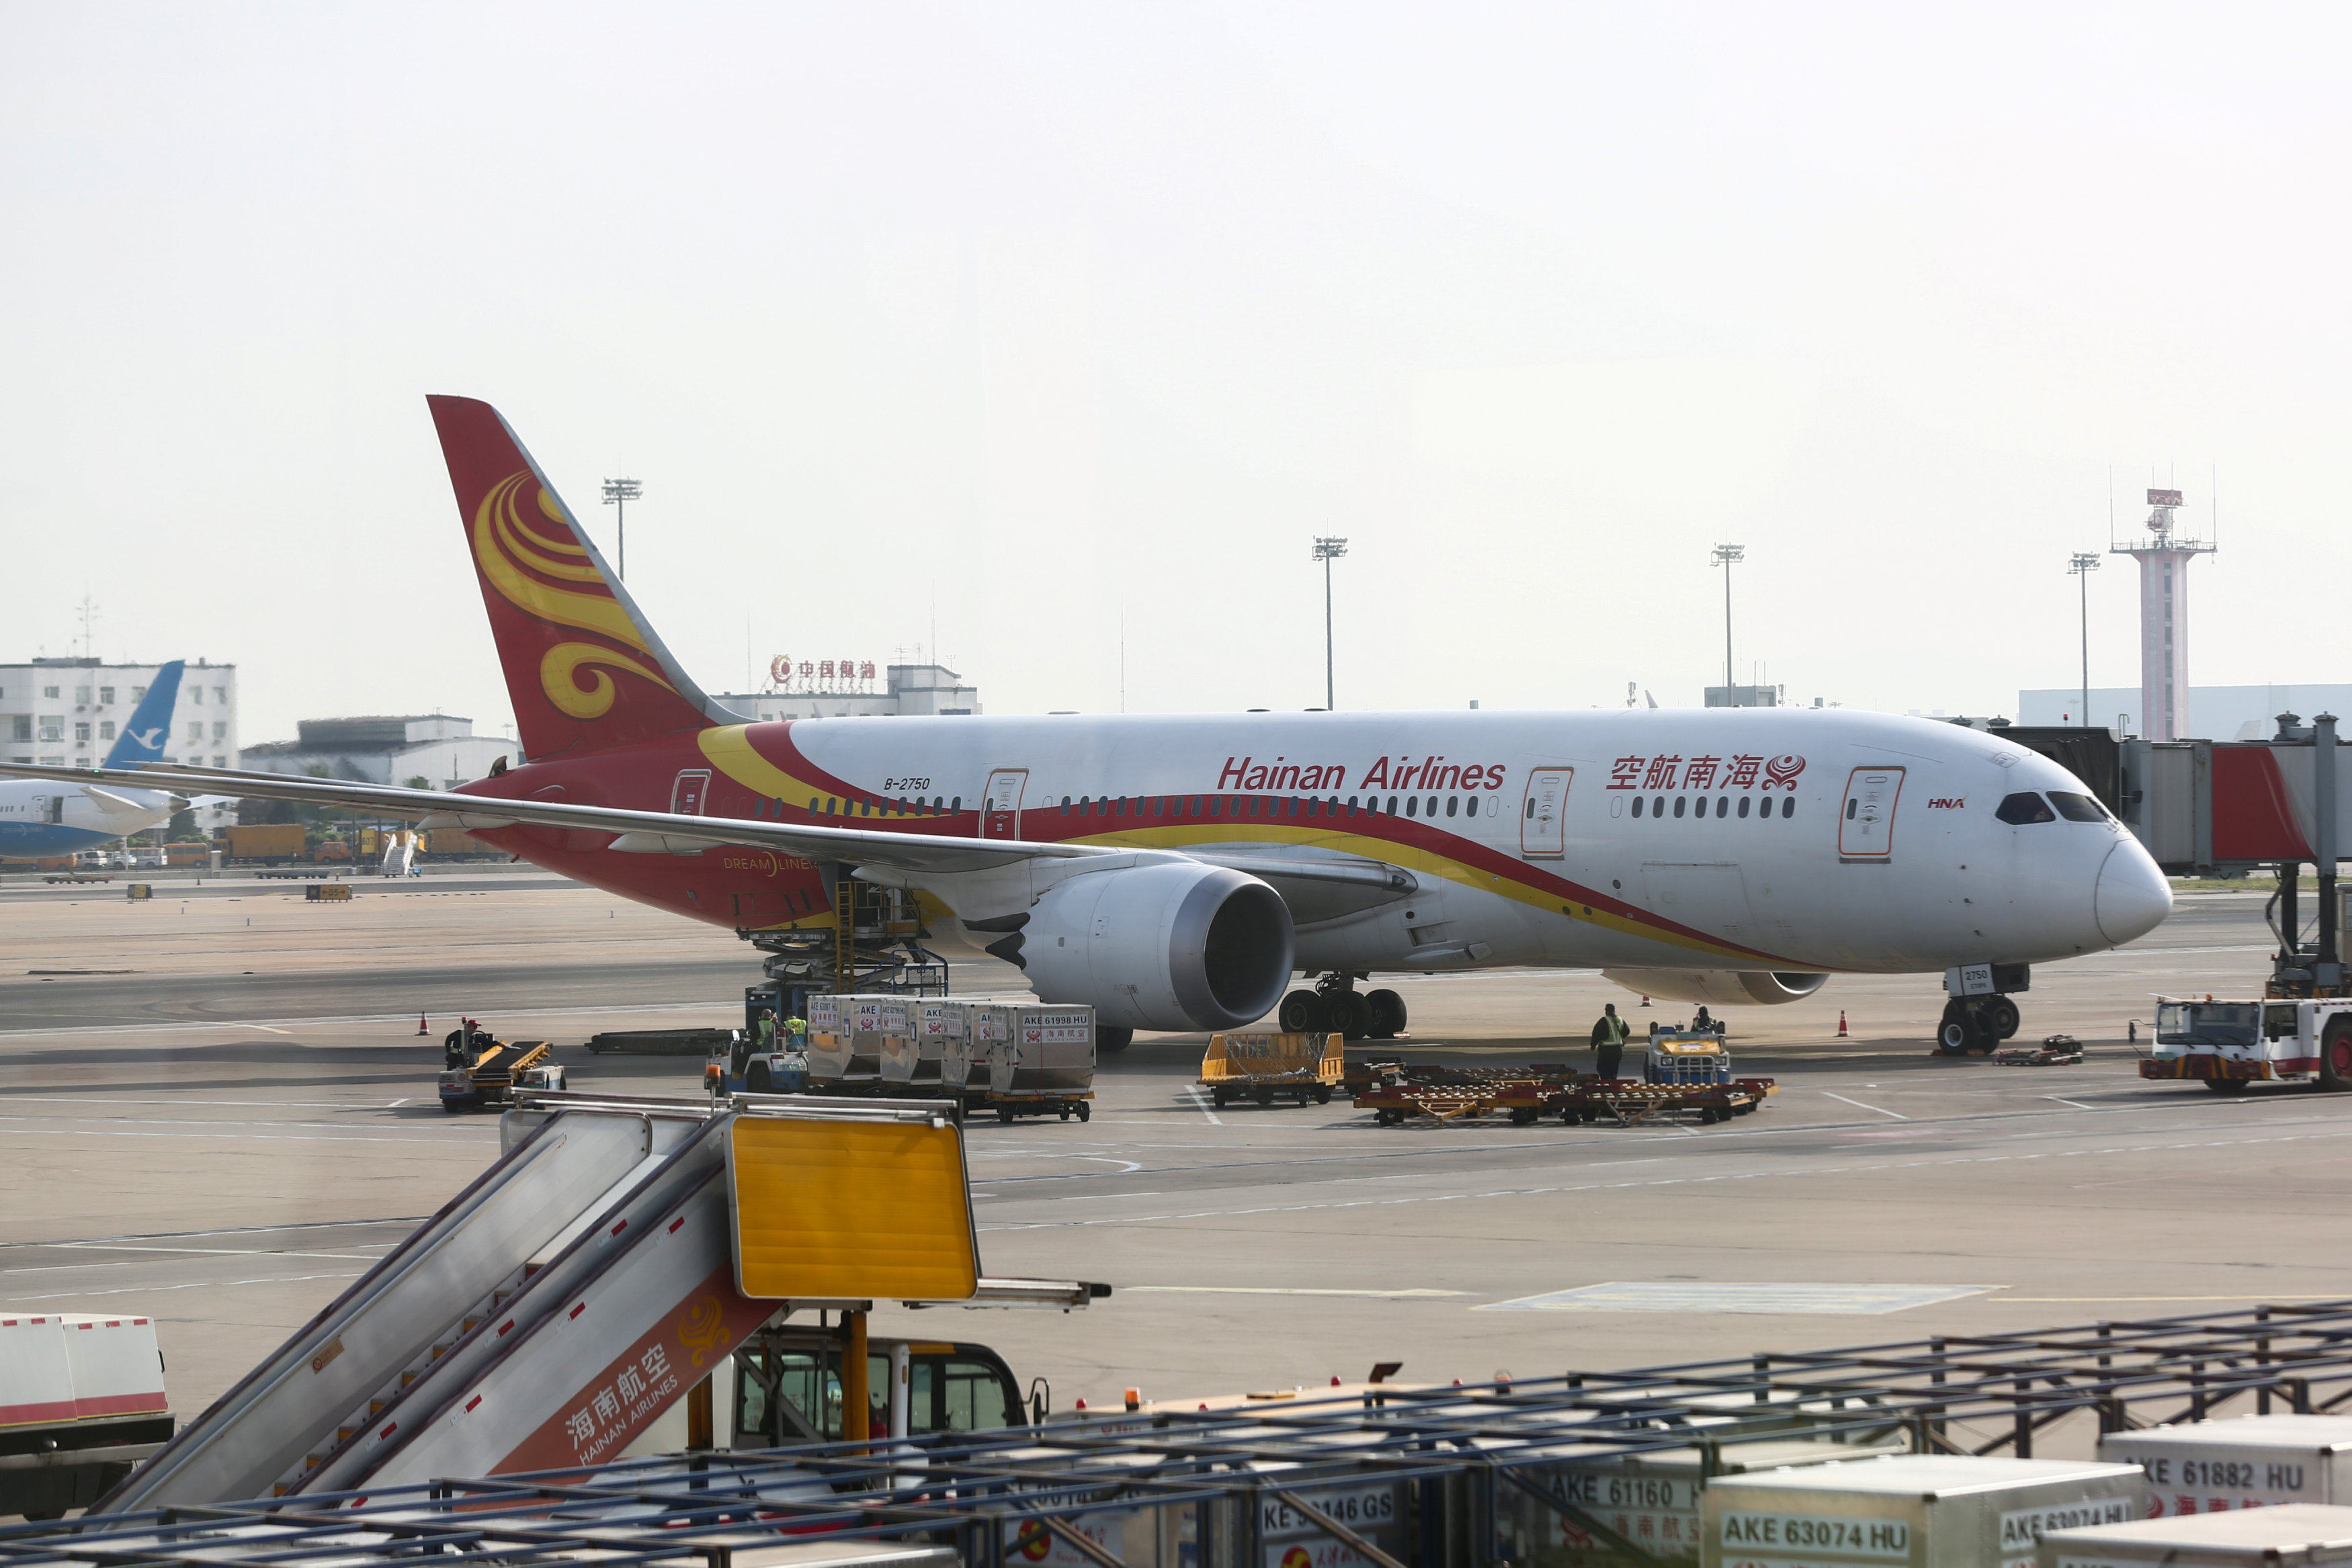 A Hainan Airlines aircraft on the tarmac at the Beijing airport on May 13, 2018. Photo: Reuters